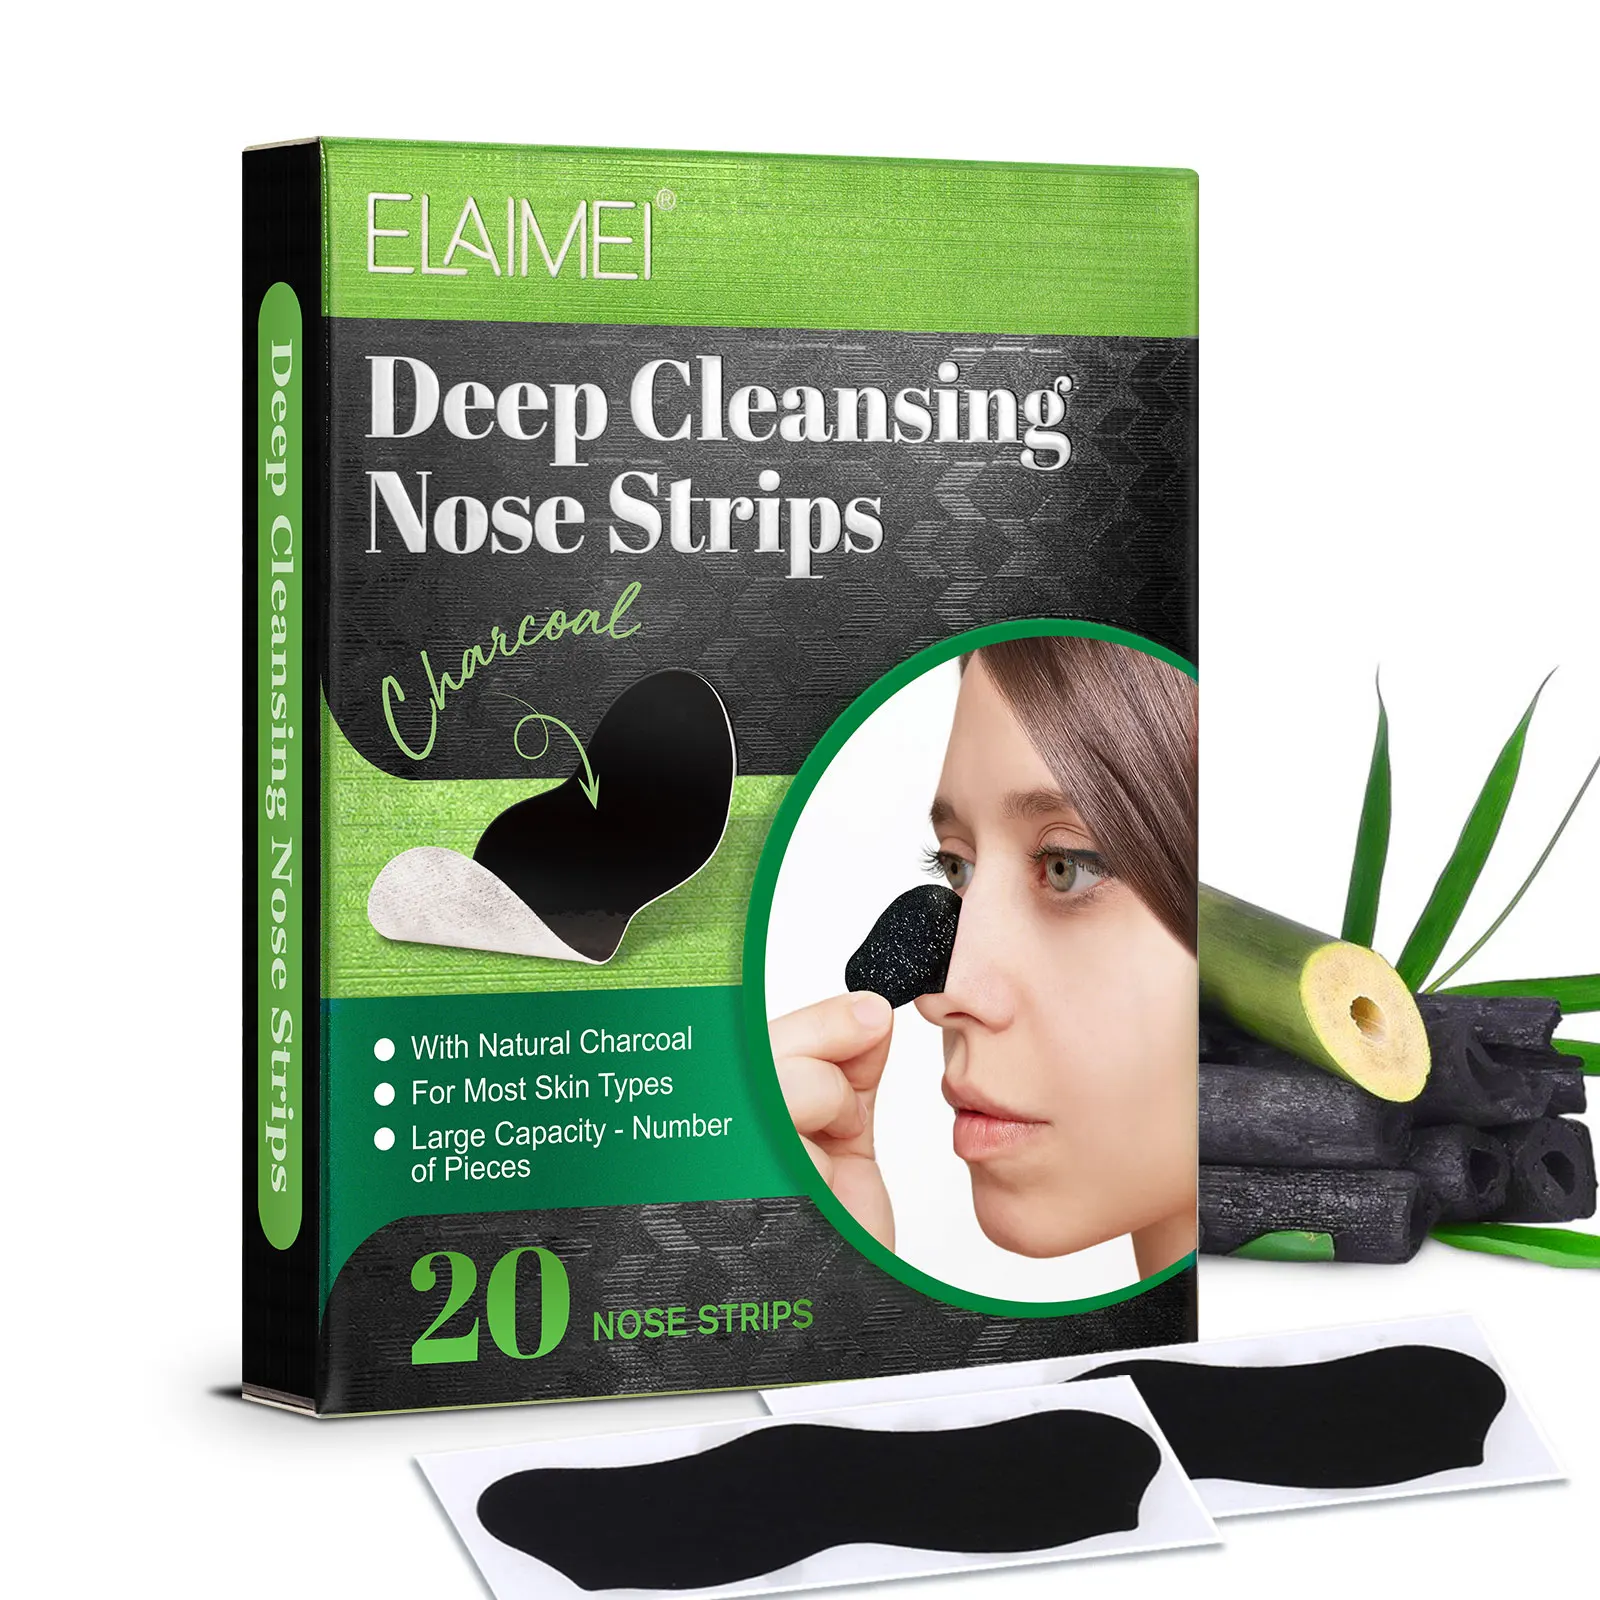 

Private Label Bamboo Charcoal Deep Cleansing Nose Strips Blackhead Removal Peel Off Mask Plants Pore Shrinking Nose Patches